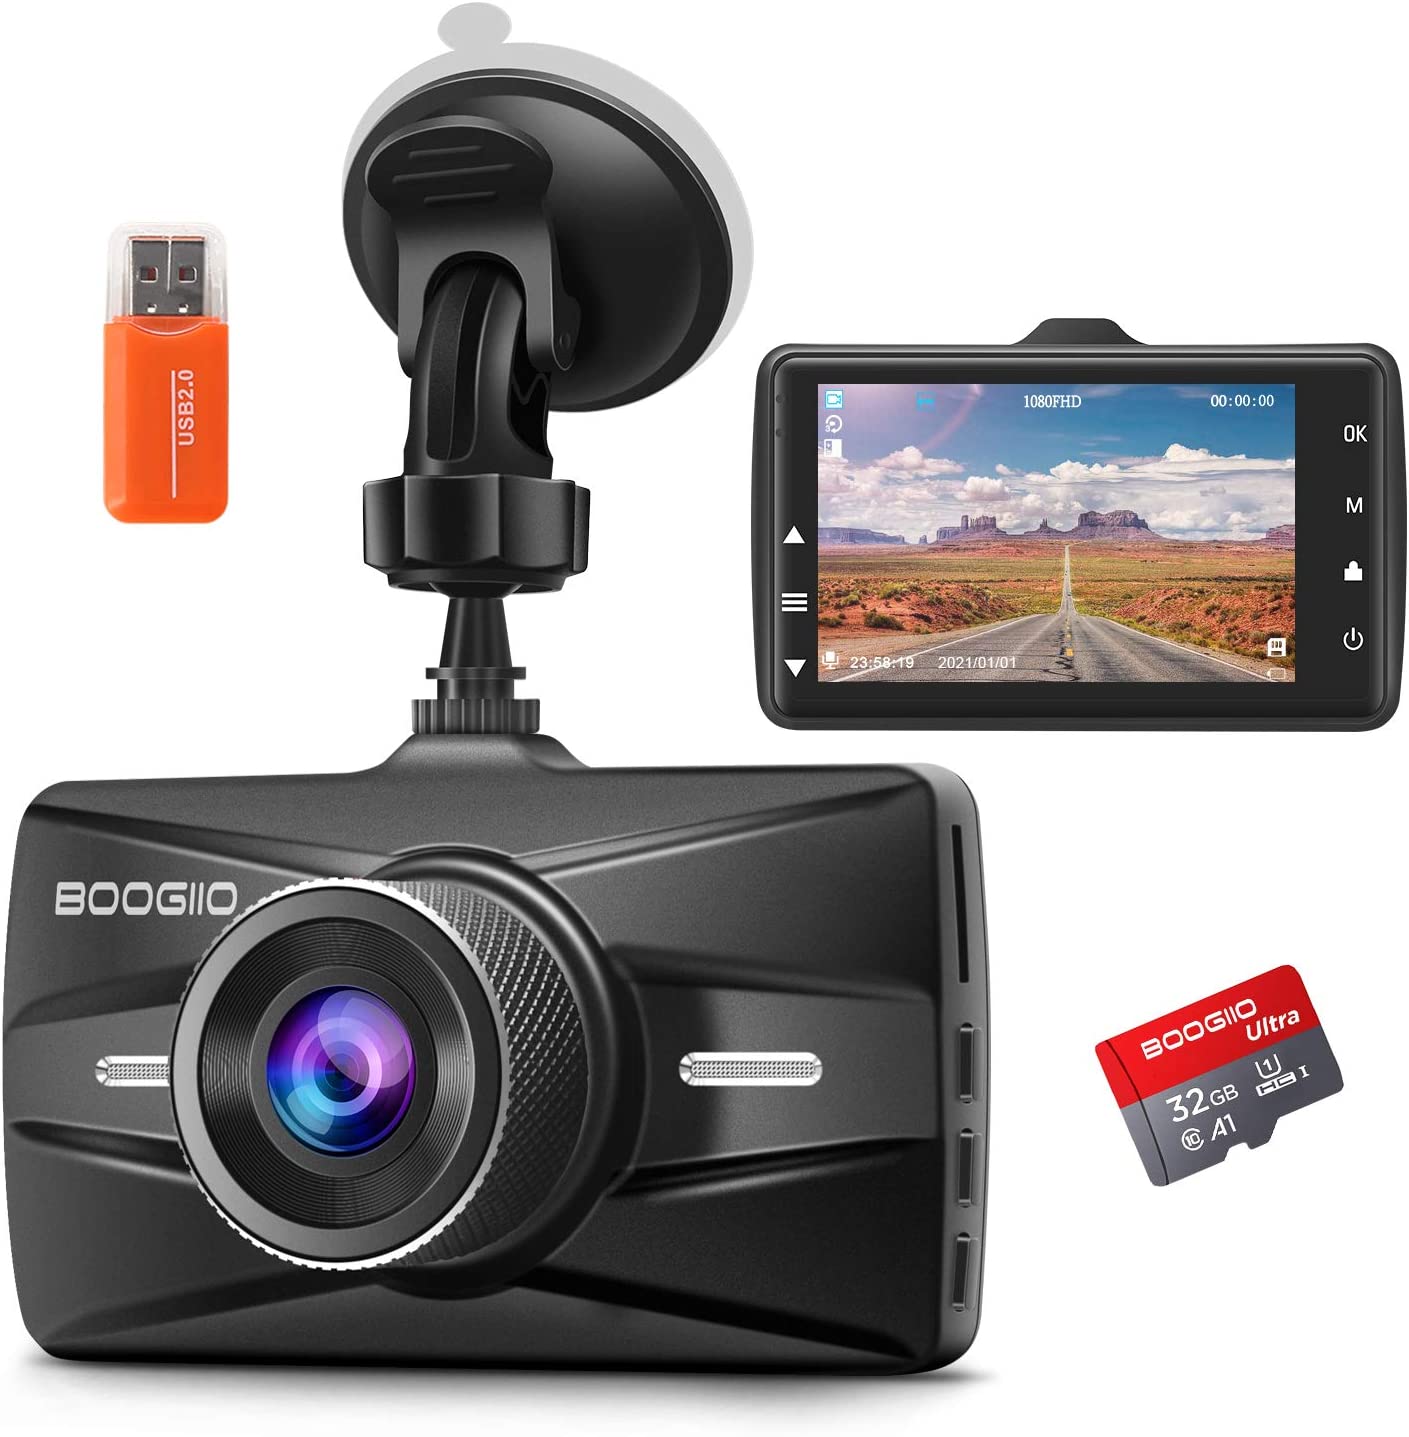 Dash Cam Front and Rear Camera FHD 1080P with Night Vision and SD Card Included 170°Wide Angle Dashboard Camera DVR Motion Detection Parking Monitor G-Sensor HDR 3 Inch IPS Screen Dash Cam for Cars 